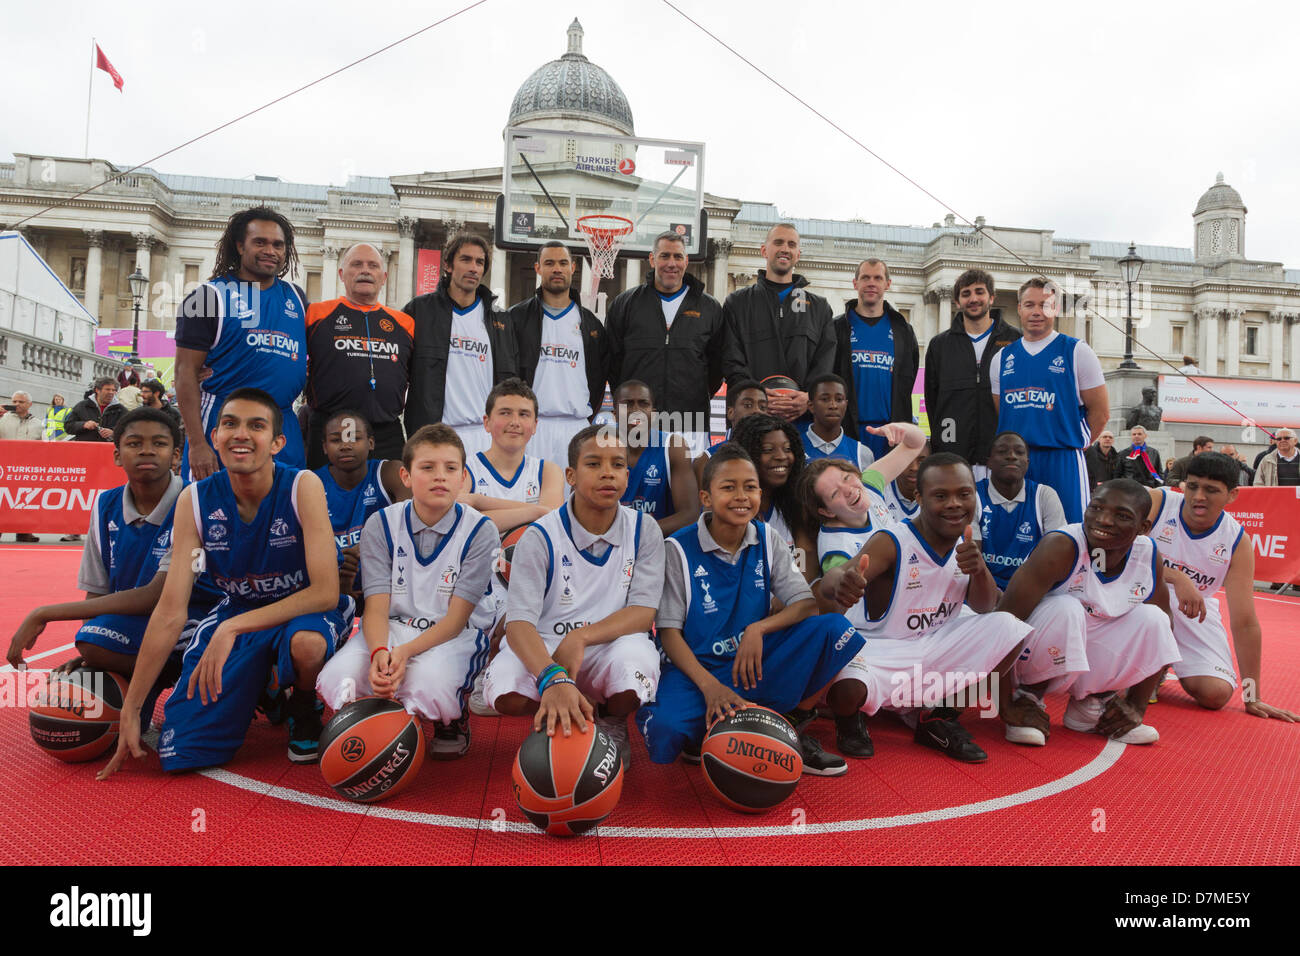 London, UK. 10th May 2013. UEFA and Euroleague Basketball greats joined athletes from the Special Olympics and the Tottenham Hotspur Foundation at the Turkish Airlines Euroleague Fan Zone in Trafalgar Square for a celebratory unified basketball game as part of the 2013 Final Four weekend festivities. The first-of-its-kind goodwill game was organized by One Team, the Euroleague’s social responsibility programme. It included football players Graeme Le Saux, Robert Pires & Christian Karembeu and Euroleague Basketball Legends Ramunas Siskauskas, Nikola Vujcic, Trajan Langdo © Nick Savage / Alamy Stock Photo